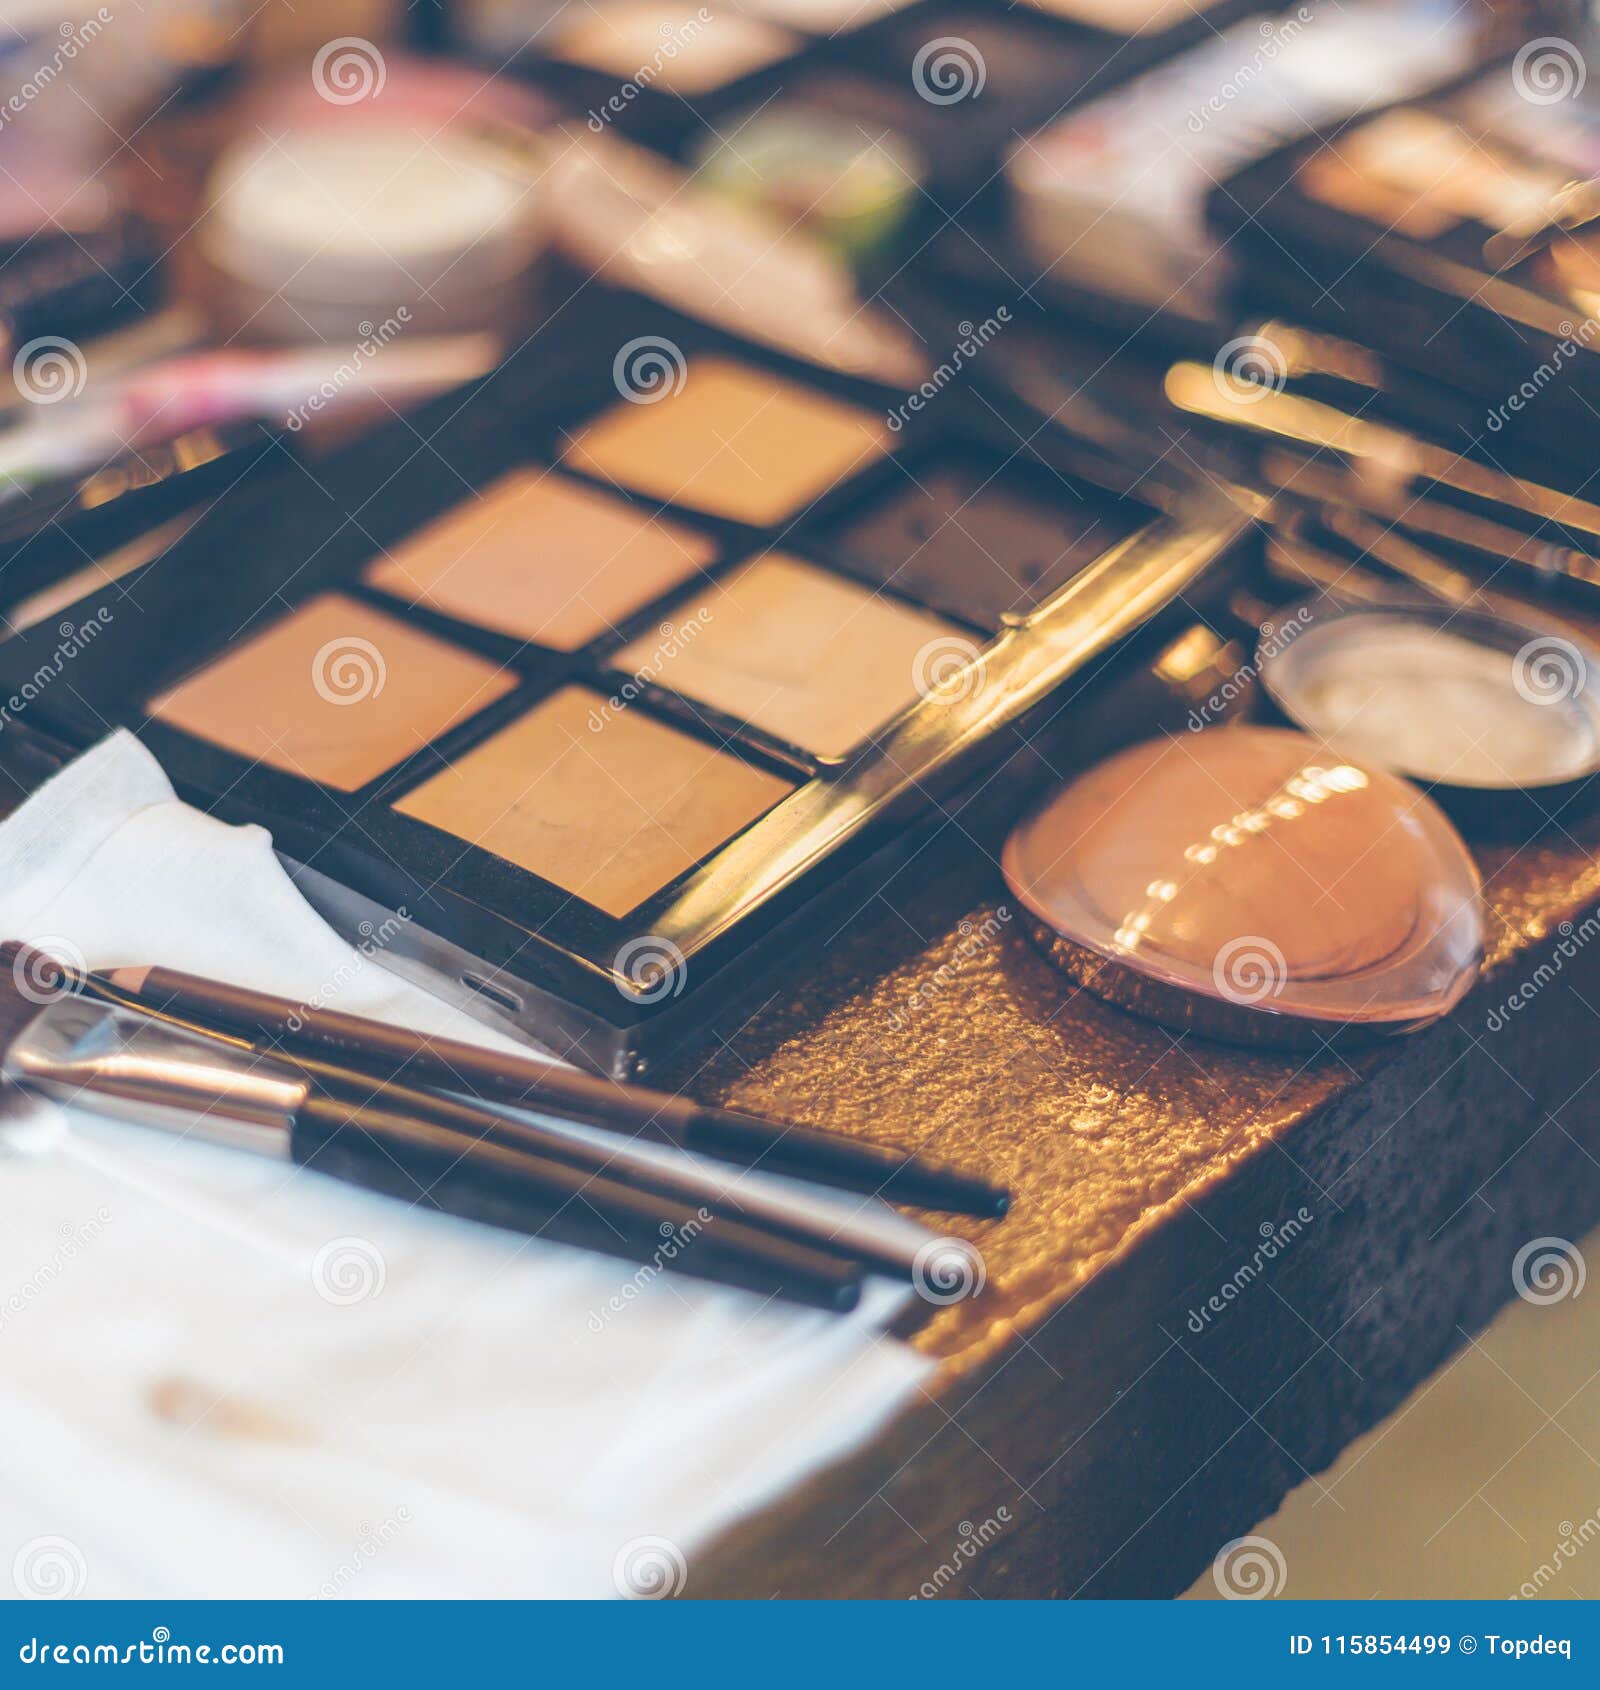 Assorted Makeup Products Macro Stock Image - Image of background, color ...